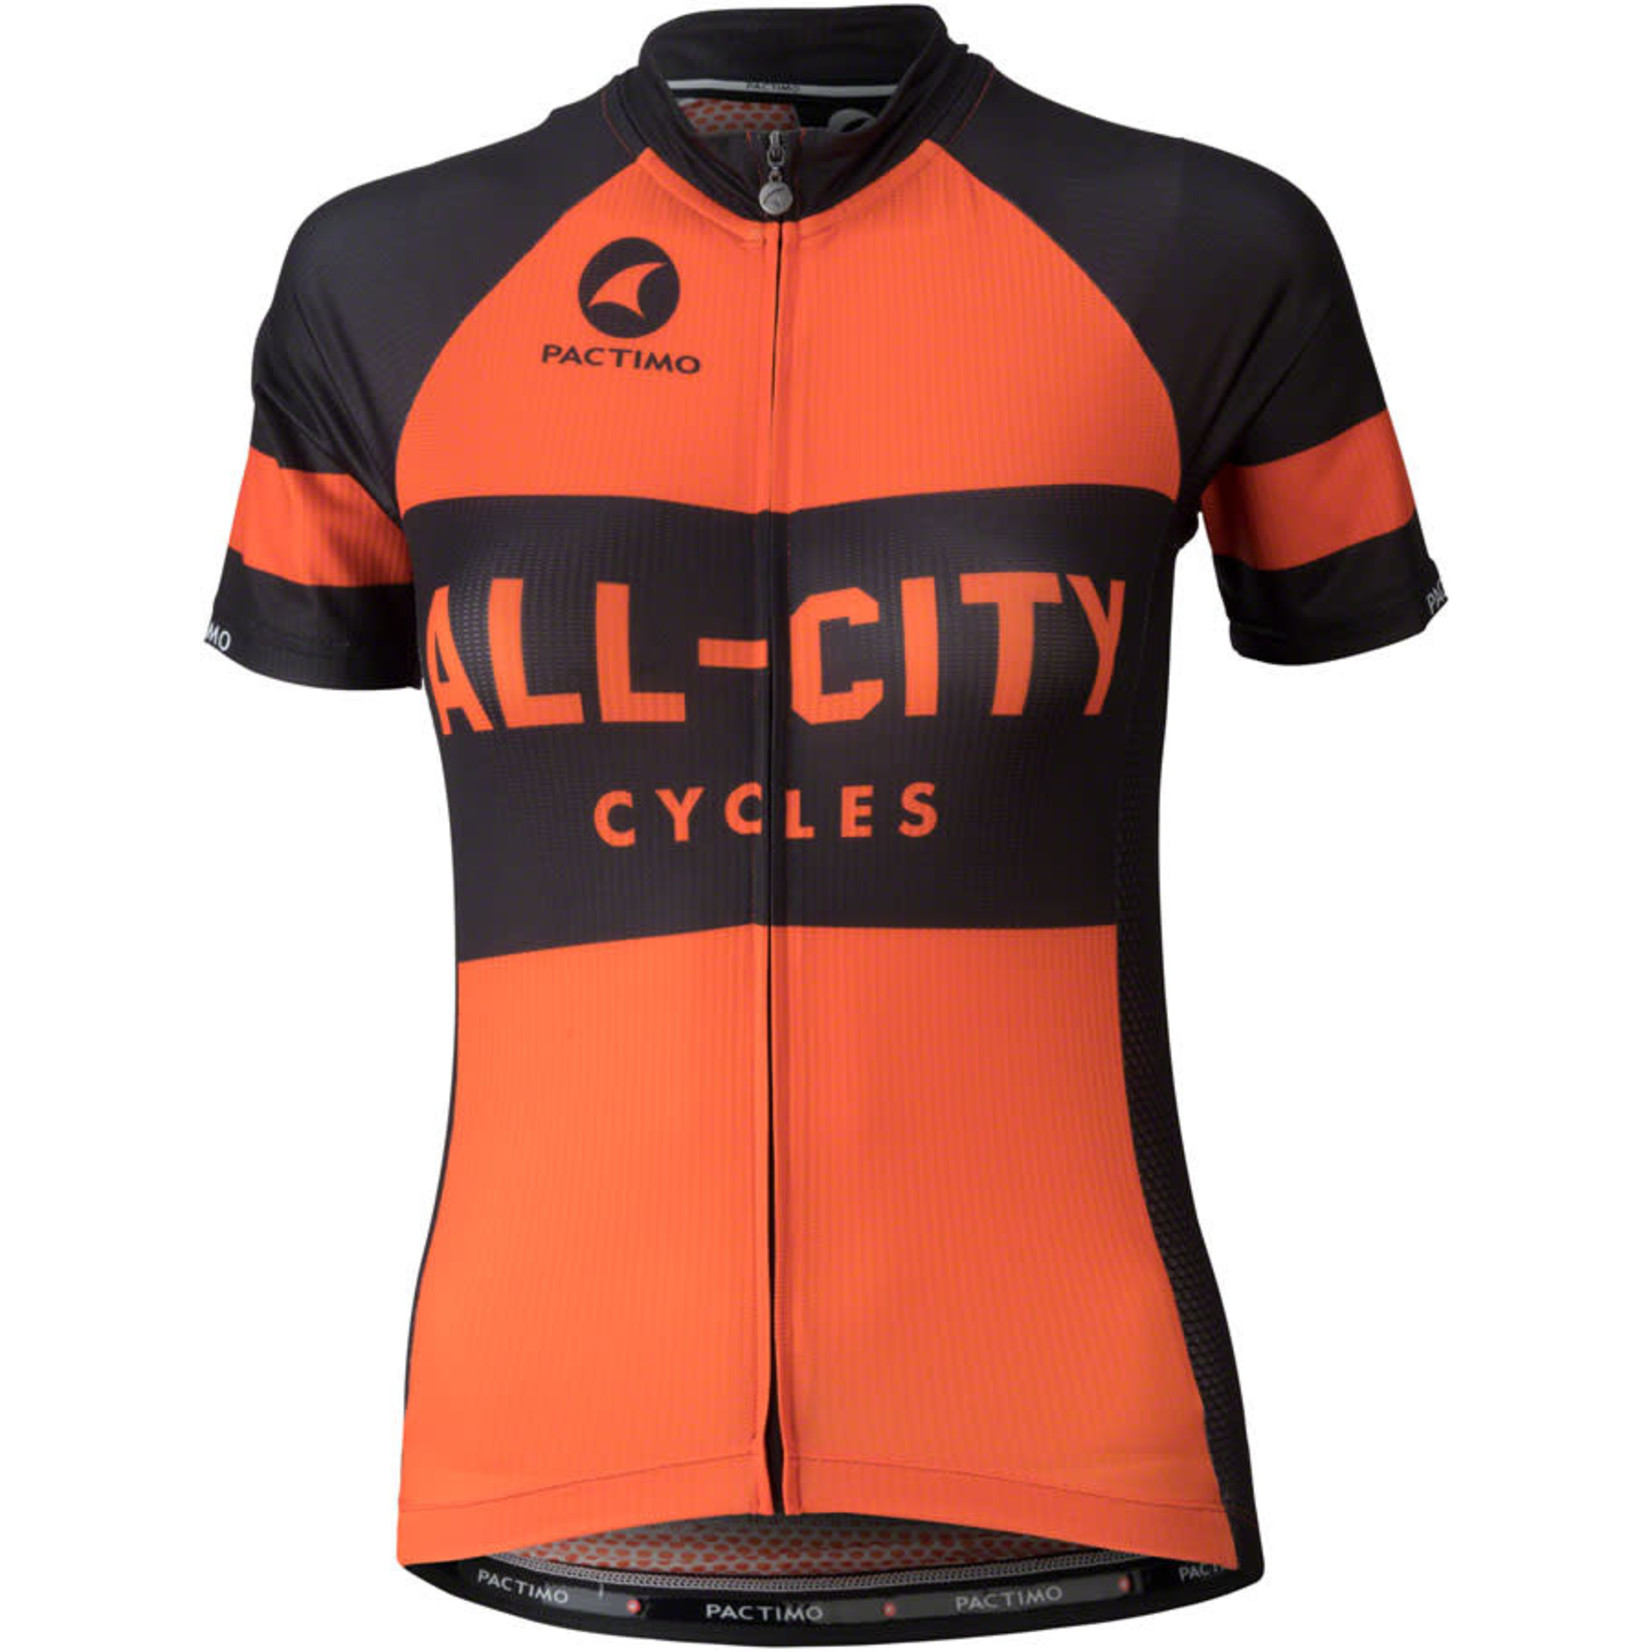 All-City All-City Classic Jersey - Orange, Short Sleeve, Women's, Large